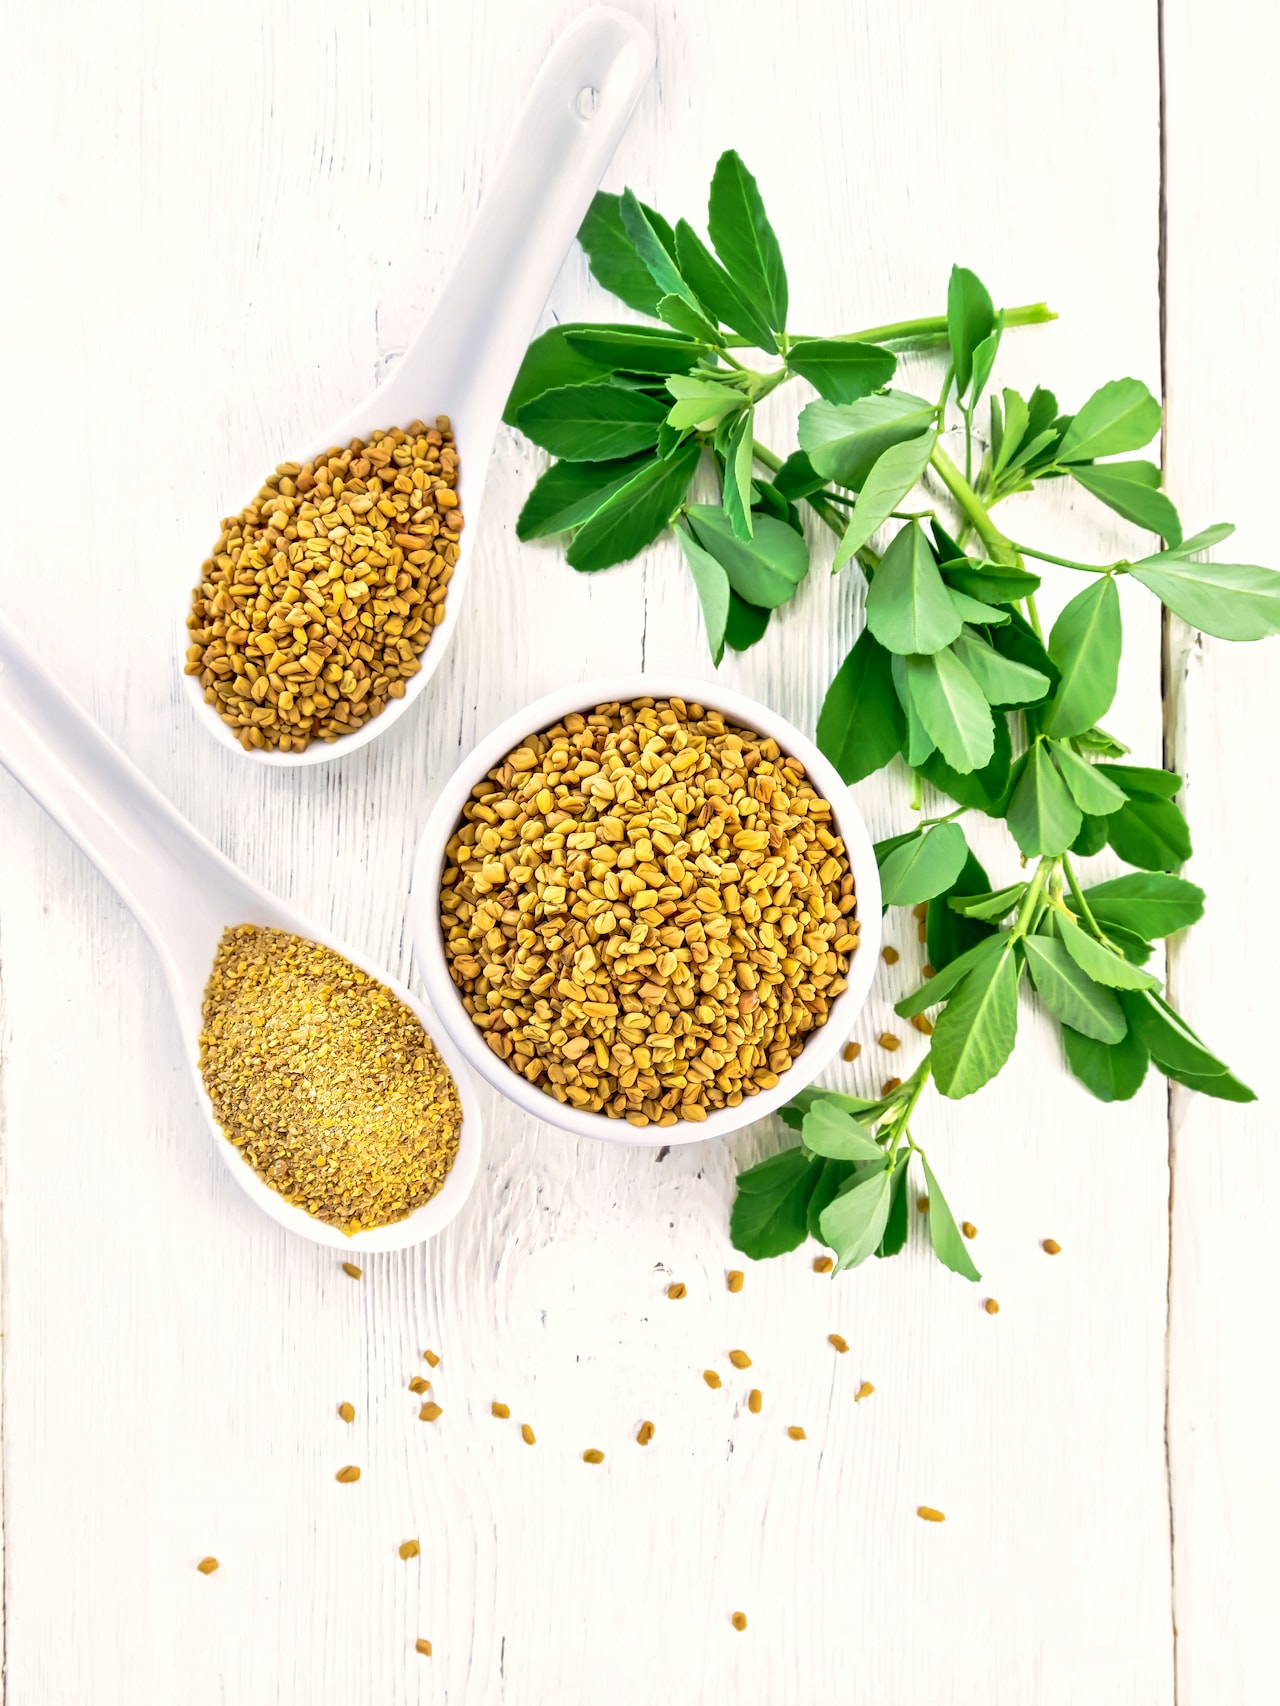 Fenugreek Guide: Health Benefits and Substitutes